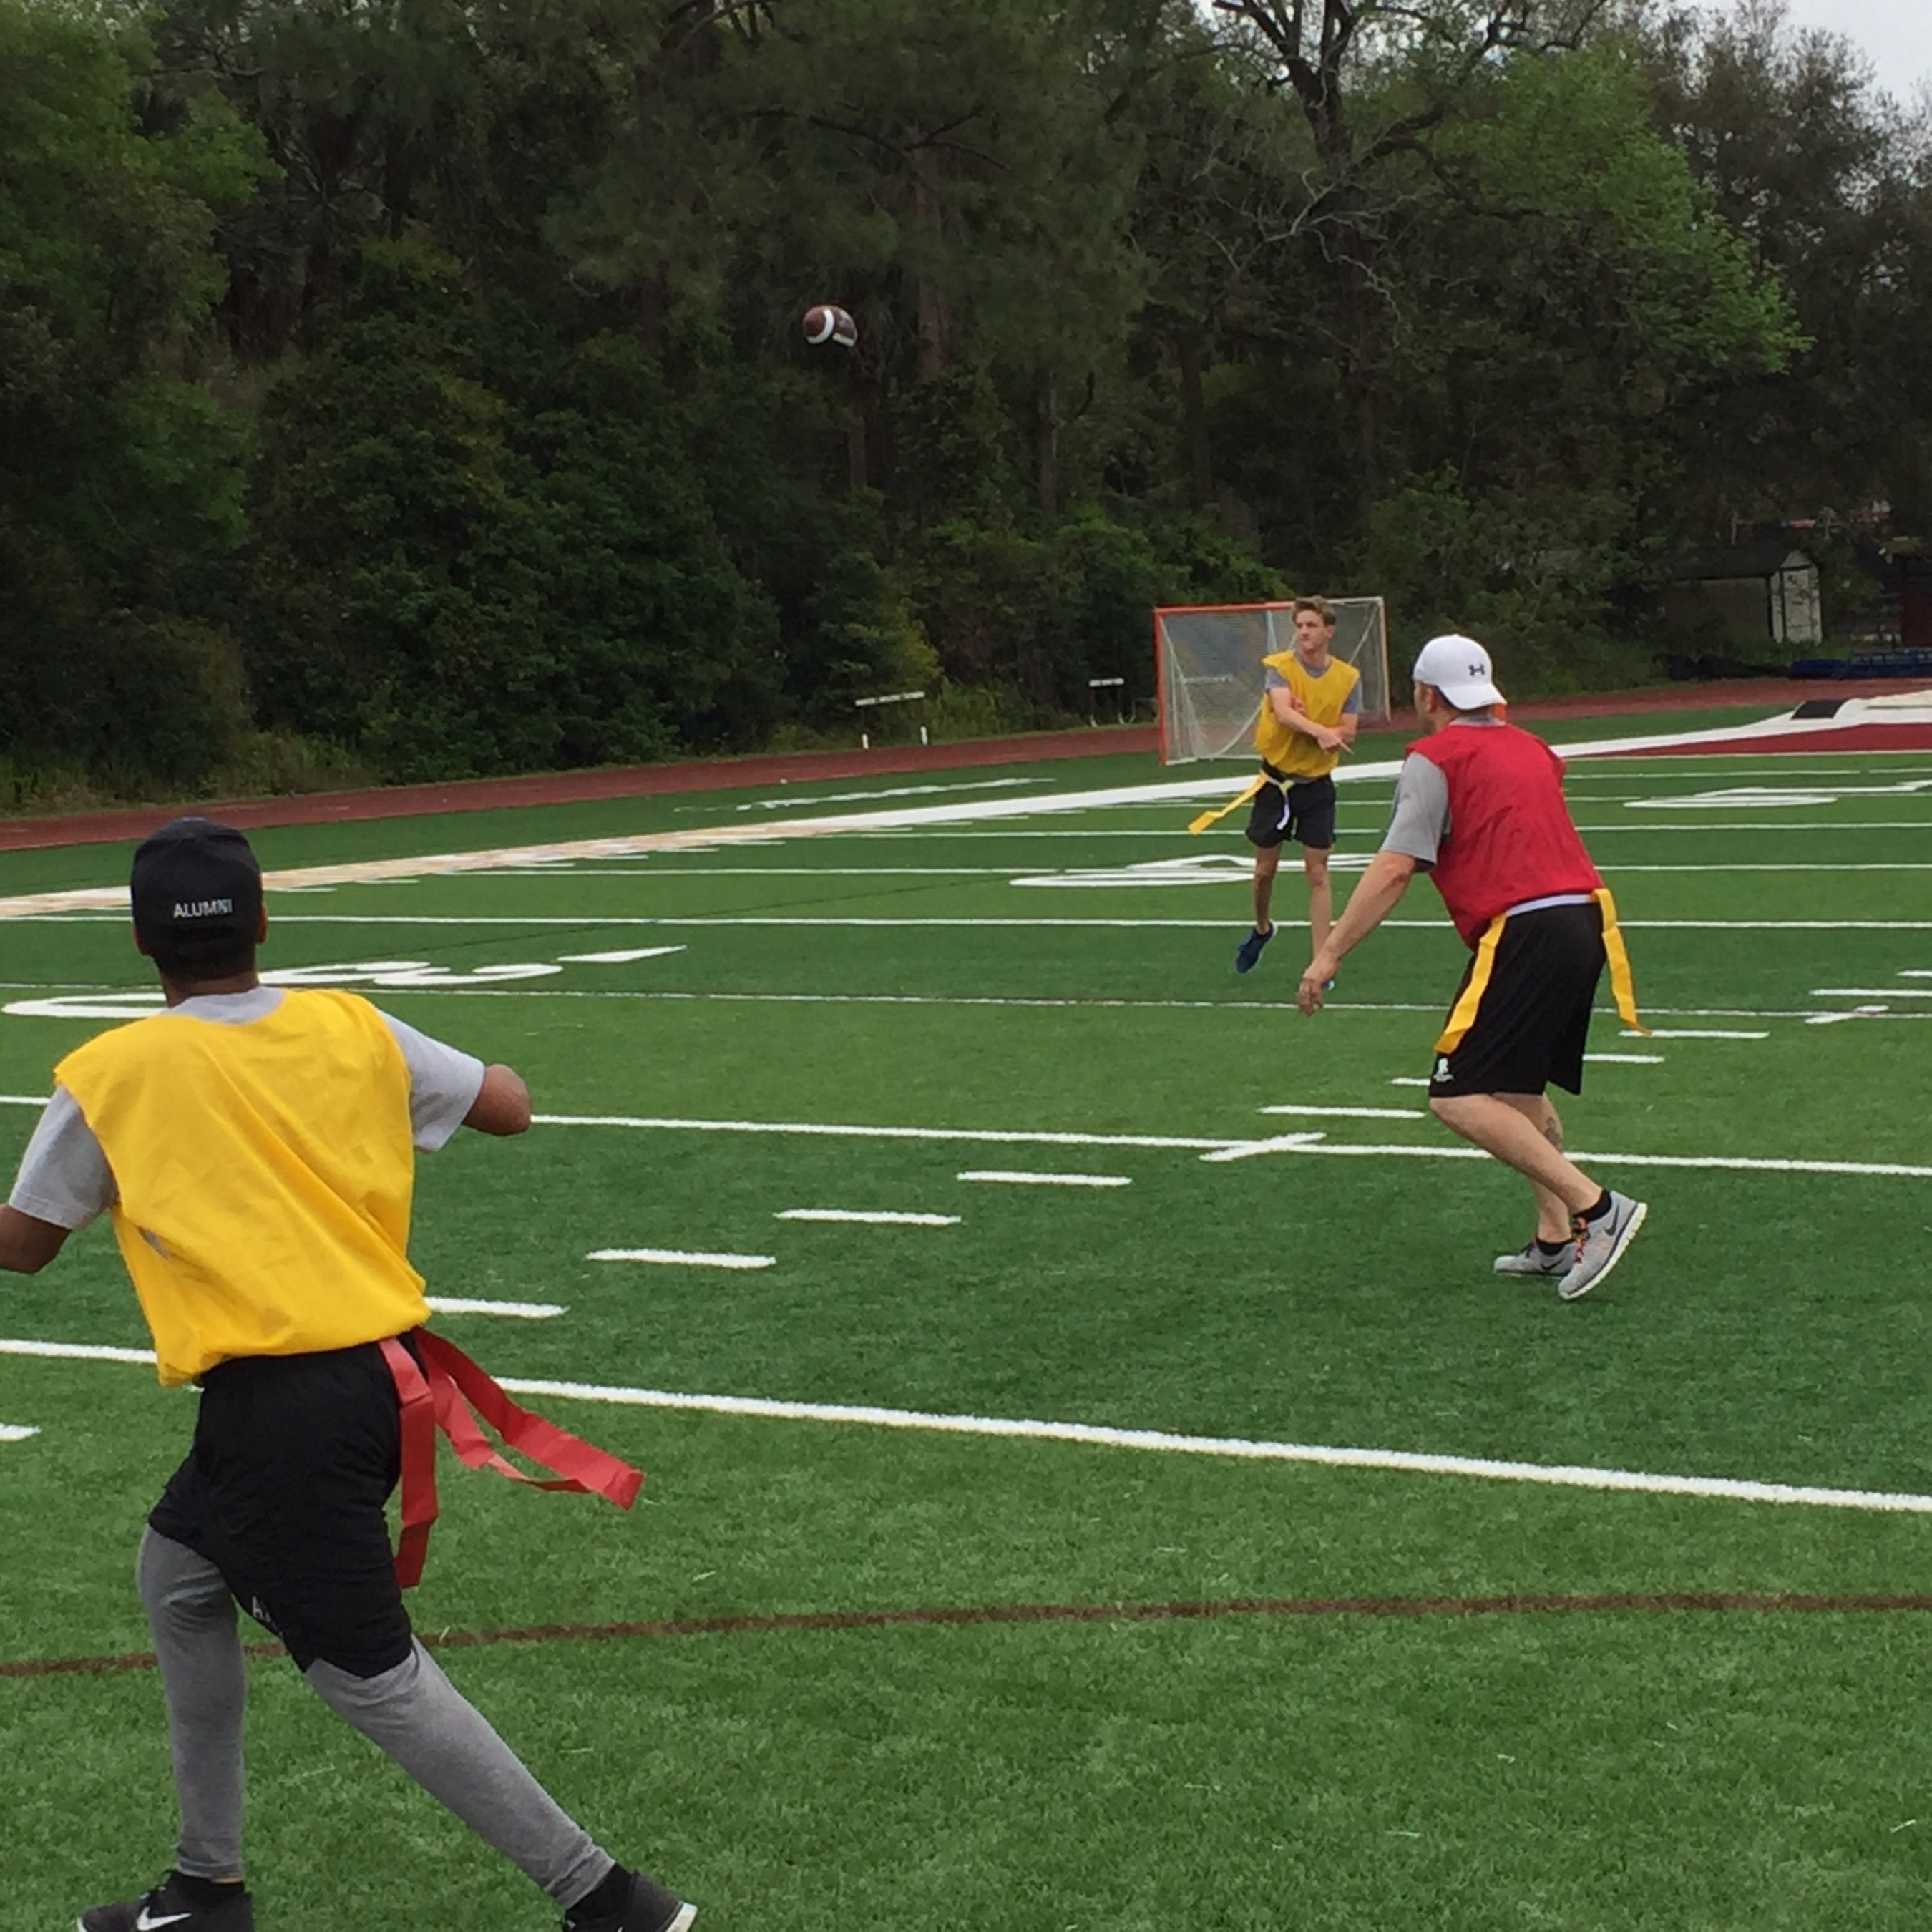 Professional ultimate Frisbee? Jacksonville has one of those